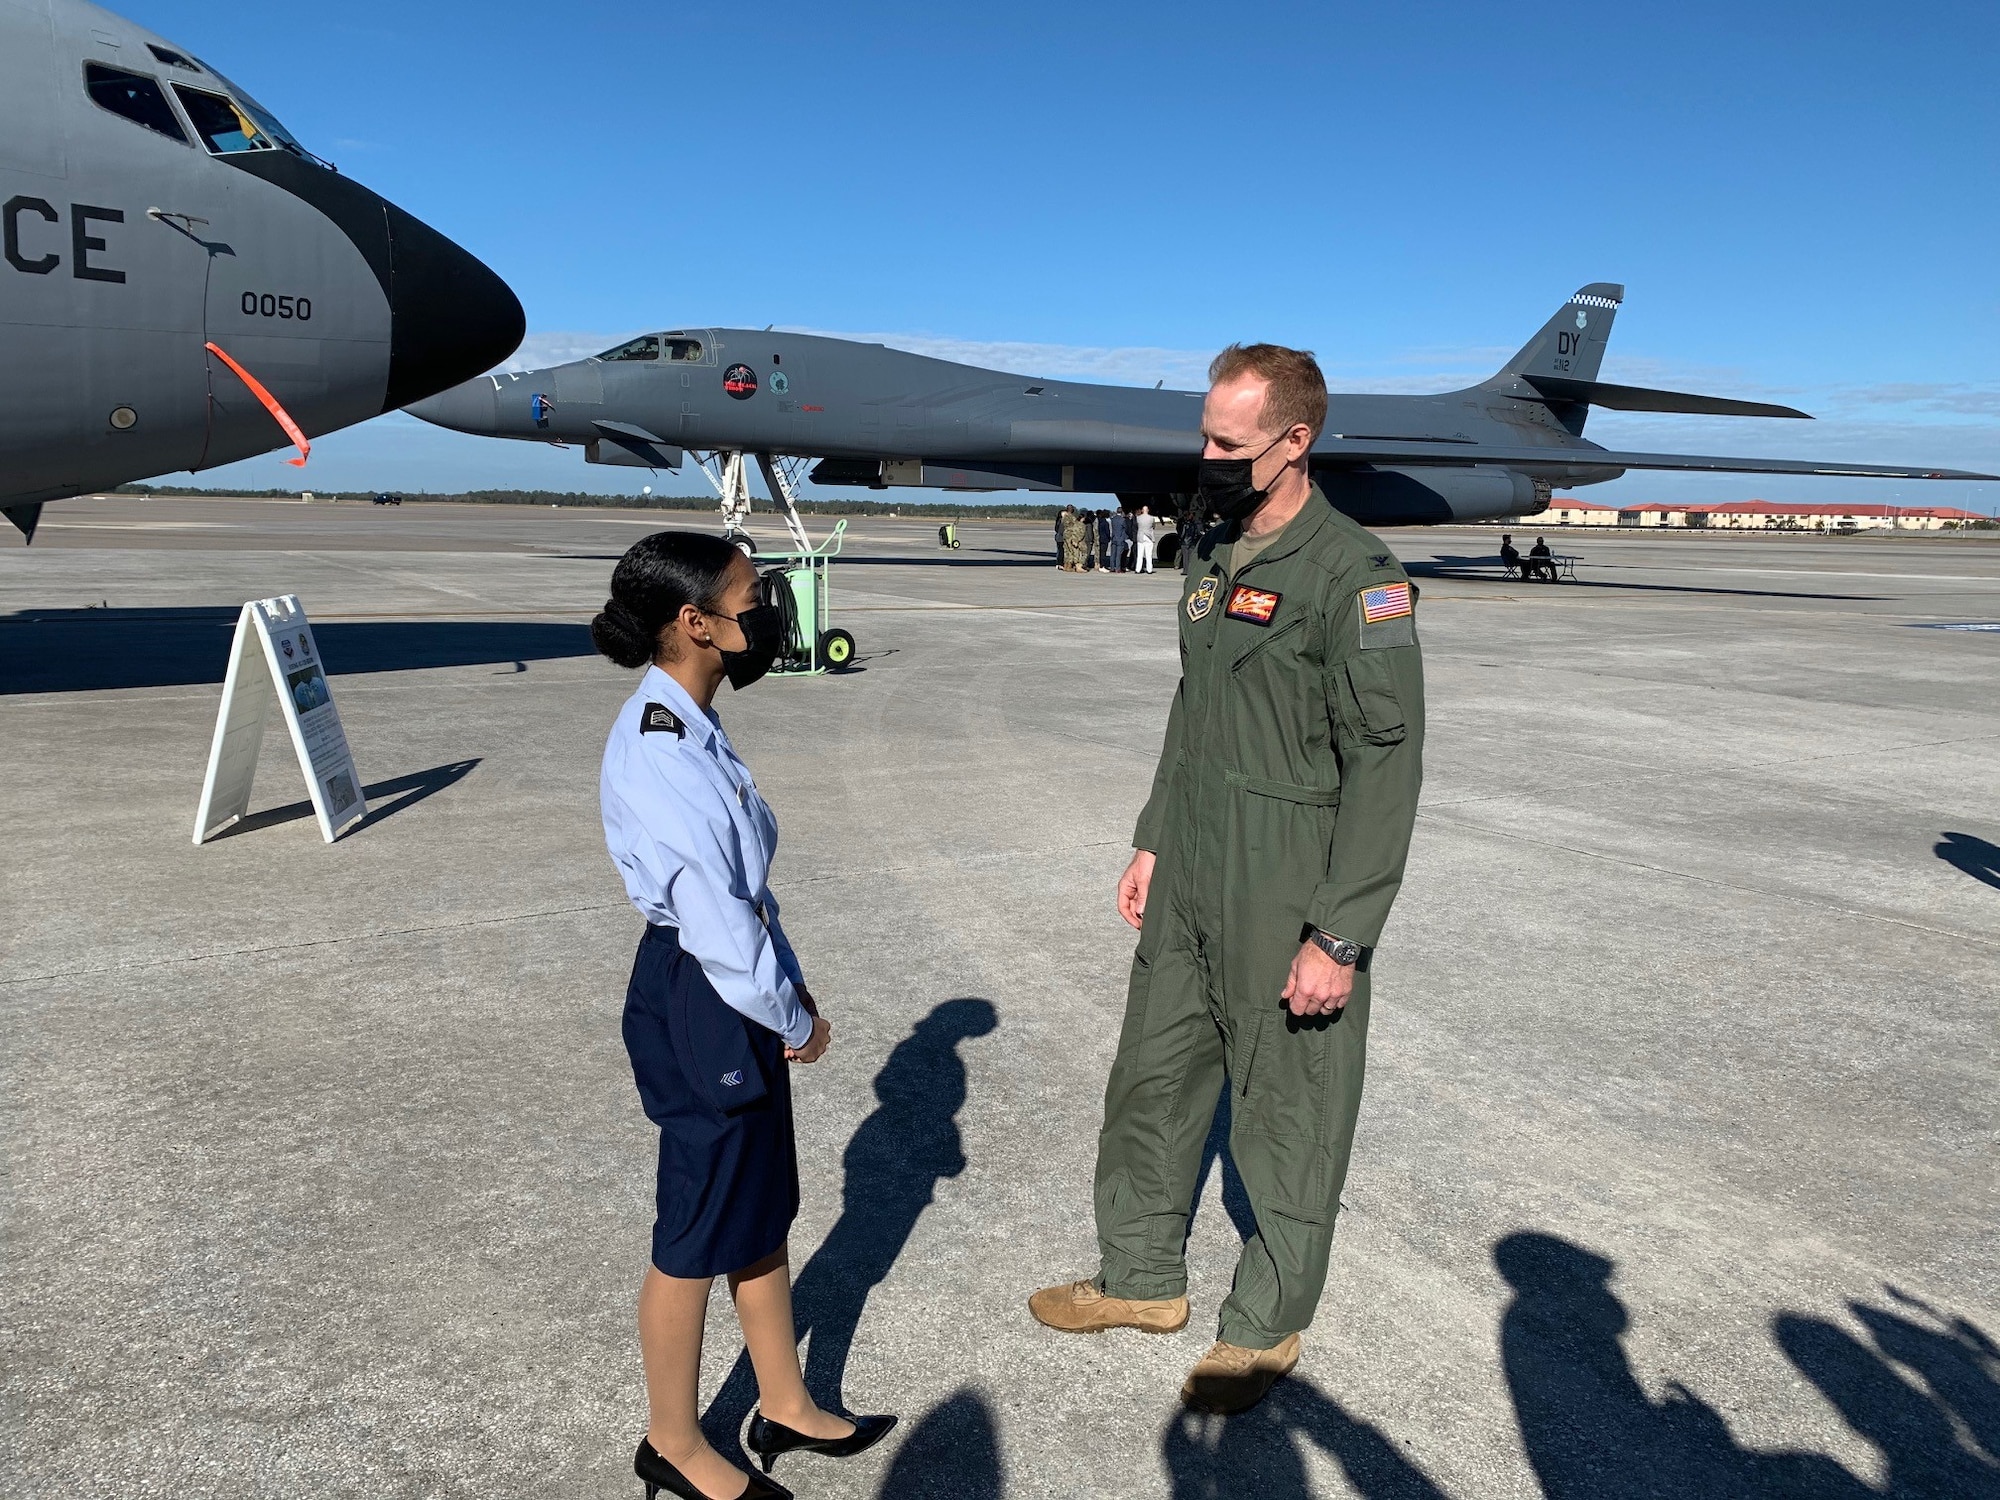 Air Force Col. Benjamin Jonsson, 6th Air Refueling Wing commander, talks with Kaliyah Wilder, a junior at Plant High School, Tampa, Florida, on the MacDill Air Force Base flight line during a tour of a B-1B Lancer bomber and KC-135 Stratotanker aircraft Feb. 5, 2021. Tampa Bay students visited MacDill AFB to learn about the Air Force aircraft scheduled to fly over Raymond James Stadium during Super Bowl LV. The tour provided both male and female students from diverse multi-ethnic backgrounds in the community the opportunity to learn about the Air Force mission while sitting in the aircraft’s cockpit and visualizing themselves soaring at 35,000 feet in the air. (U.S. Air Force photo by Terry Montrose)